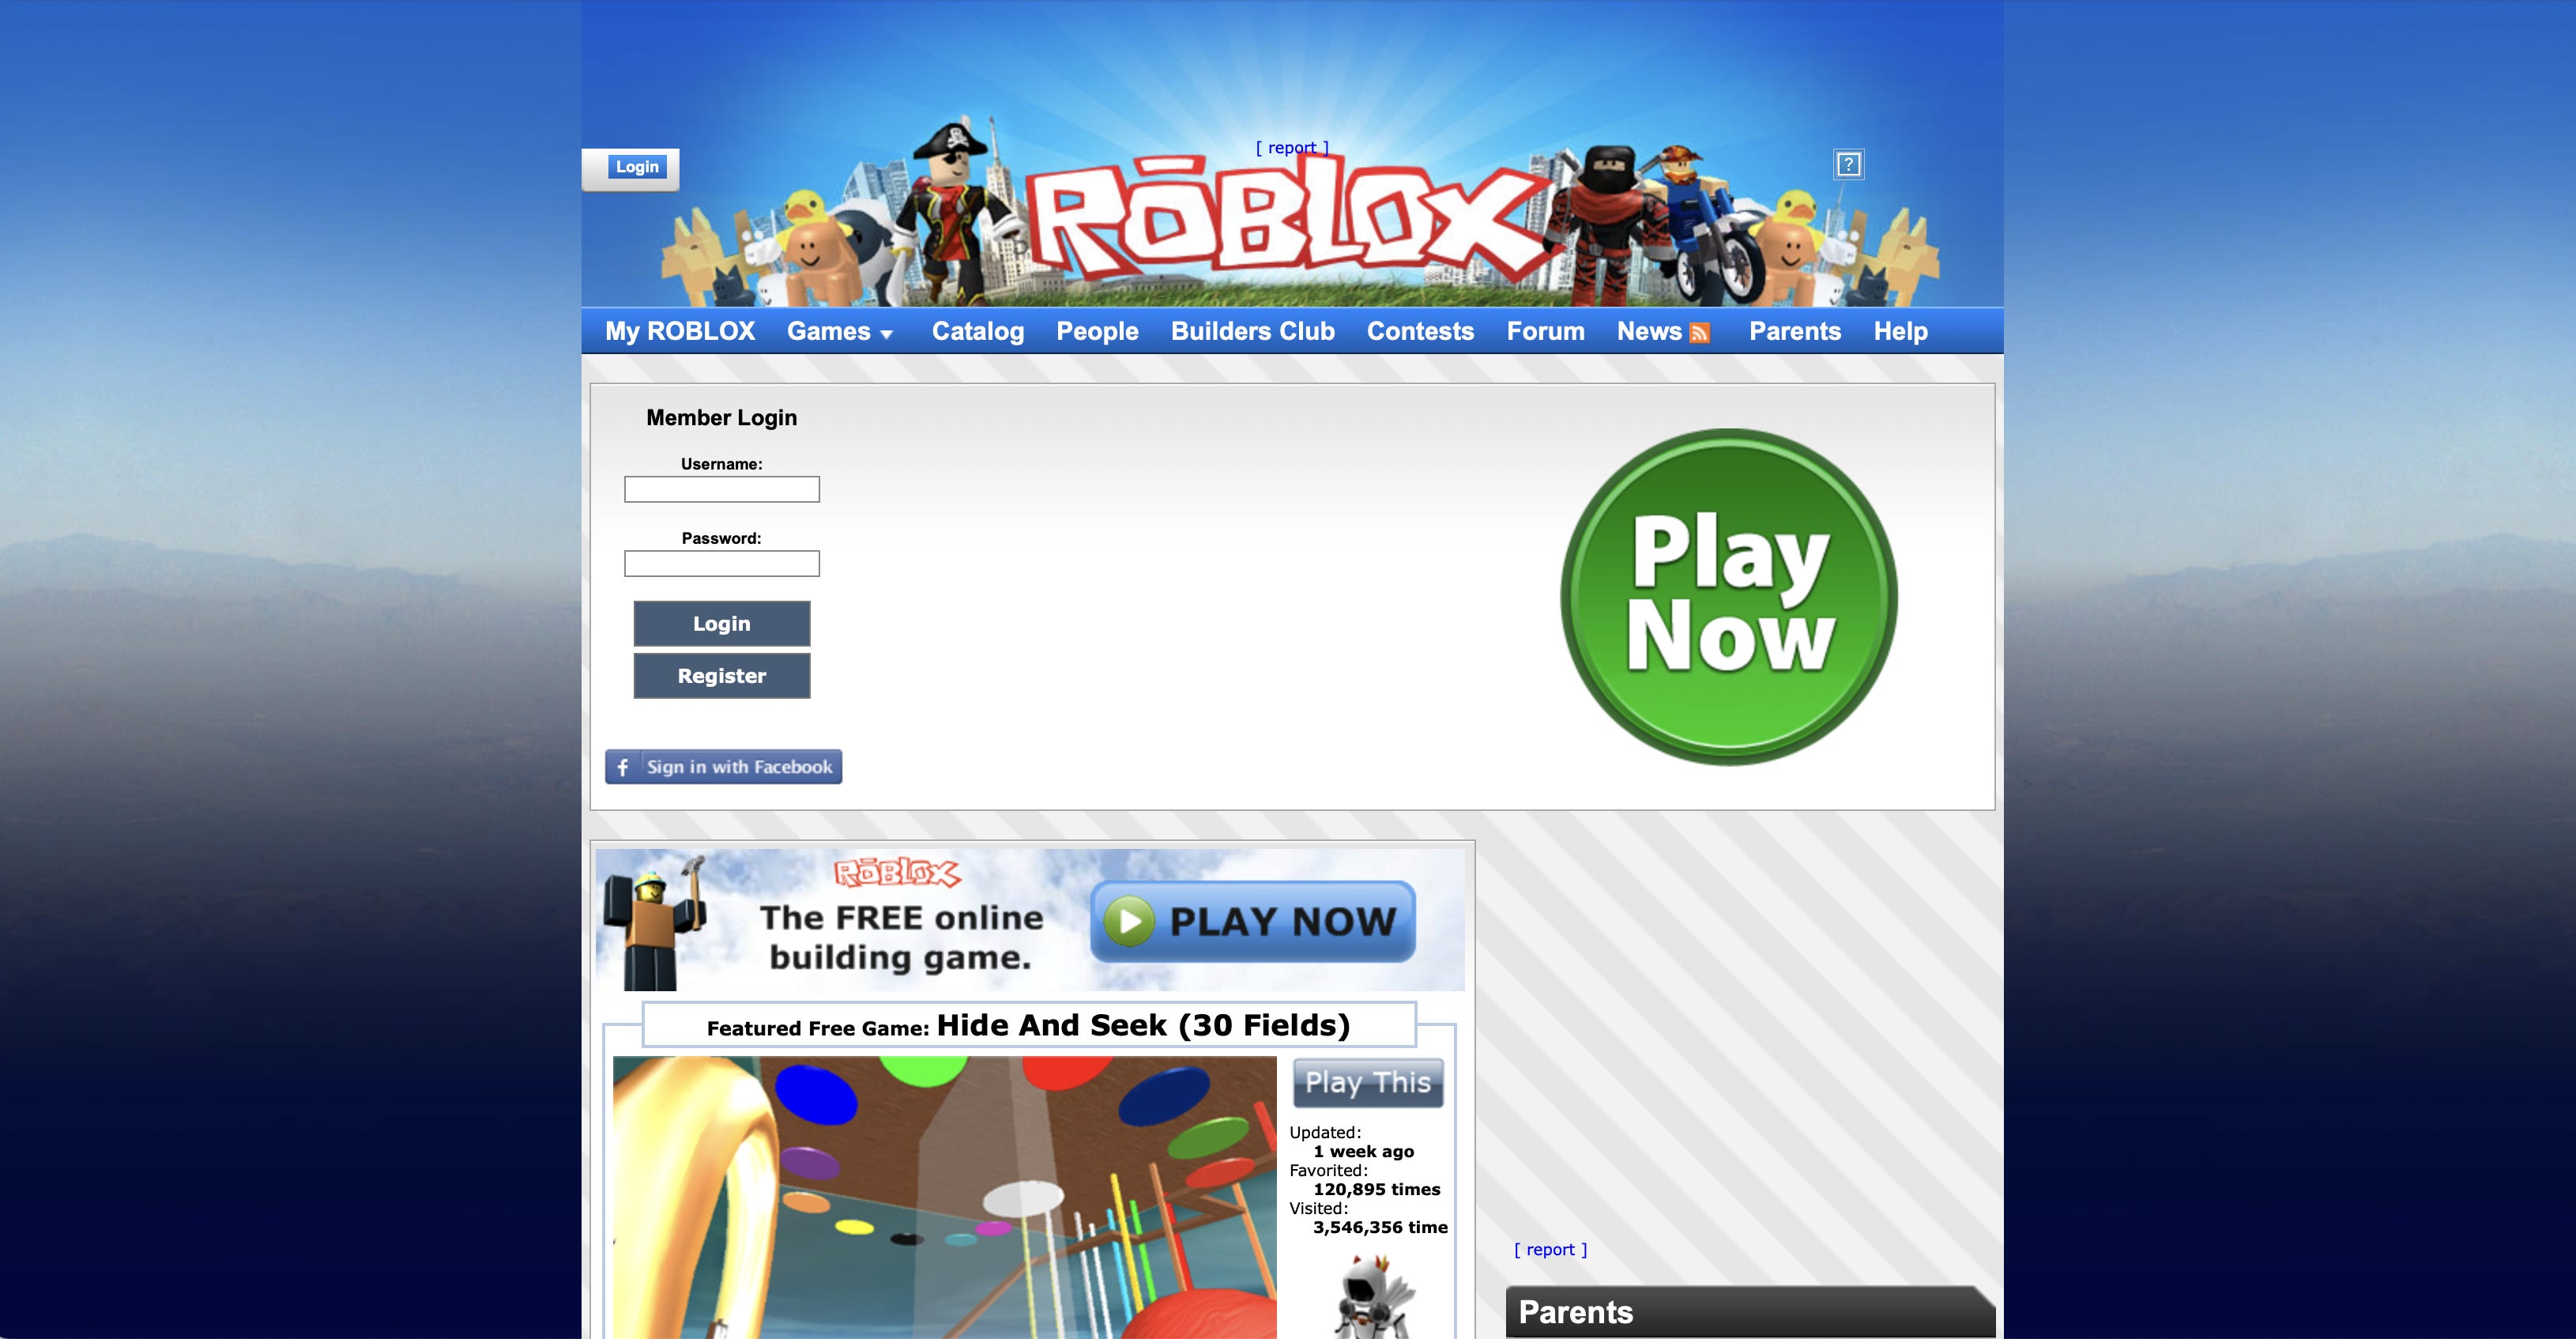 Roblox S Growth Strategies And Why Becoming A Metaverse Is A Bad Idea By Benjamin Schroeder No Ordinary Strategy - roblox account over 13 years meaning